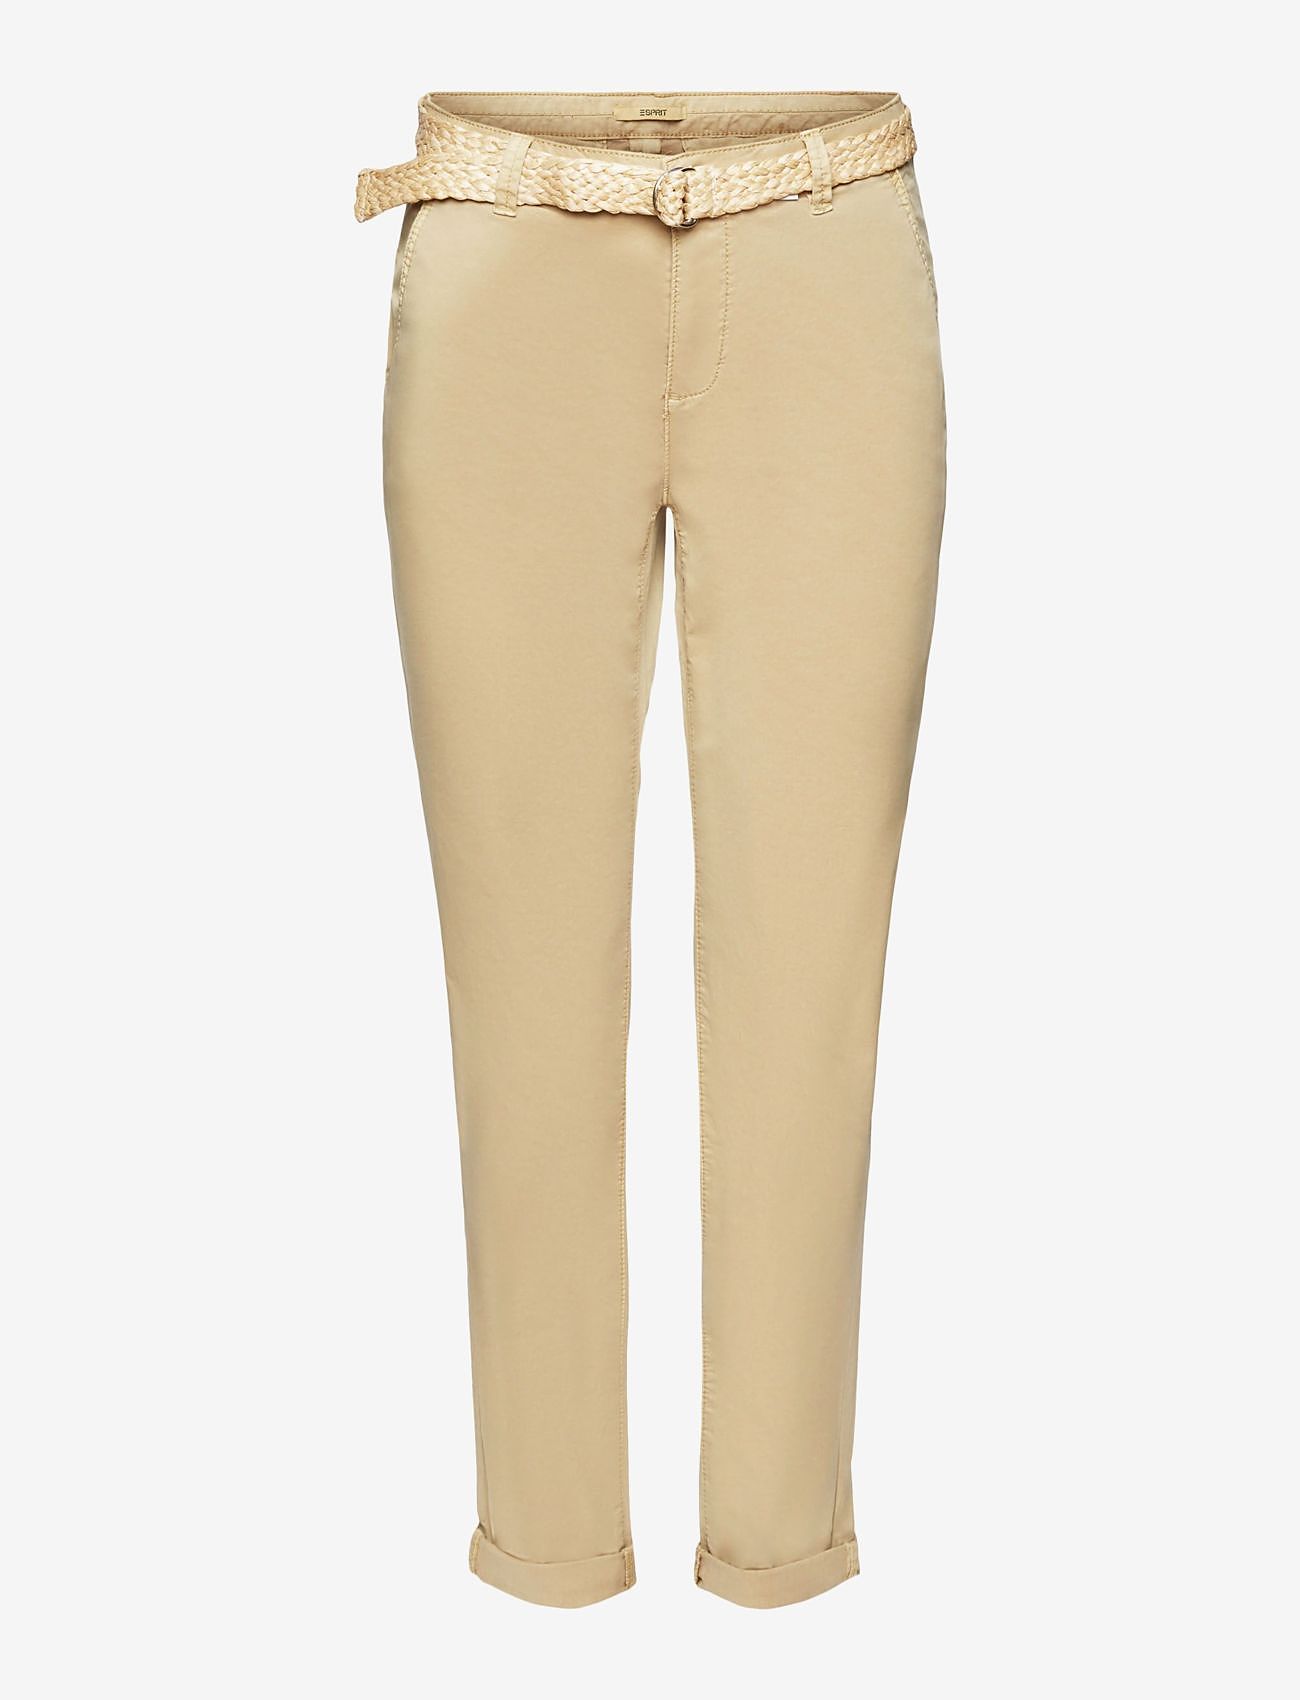 Esprit Casual - Cropped chinos - chino's - sand - 0